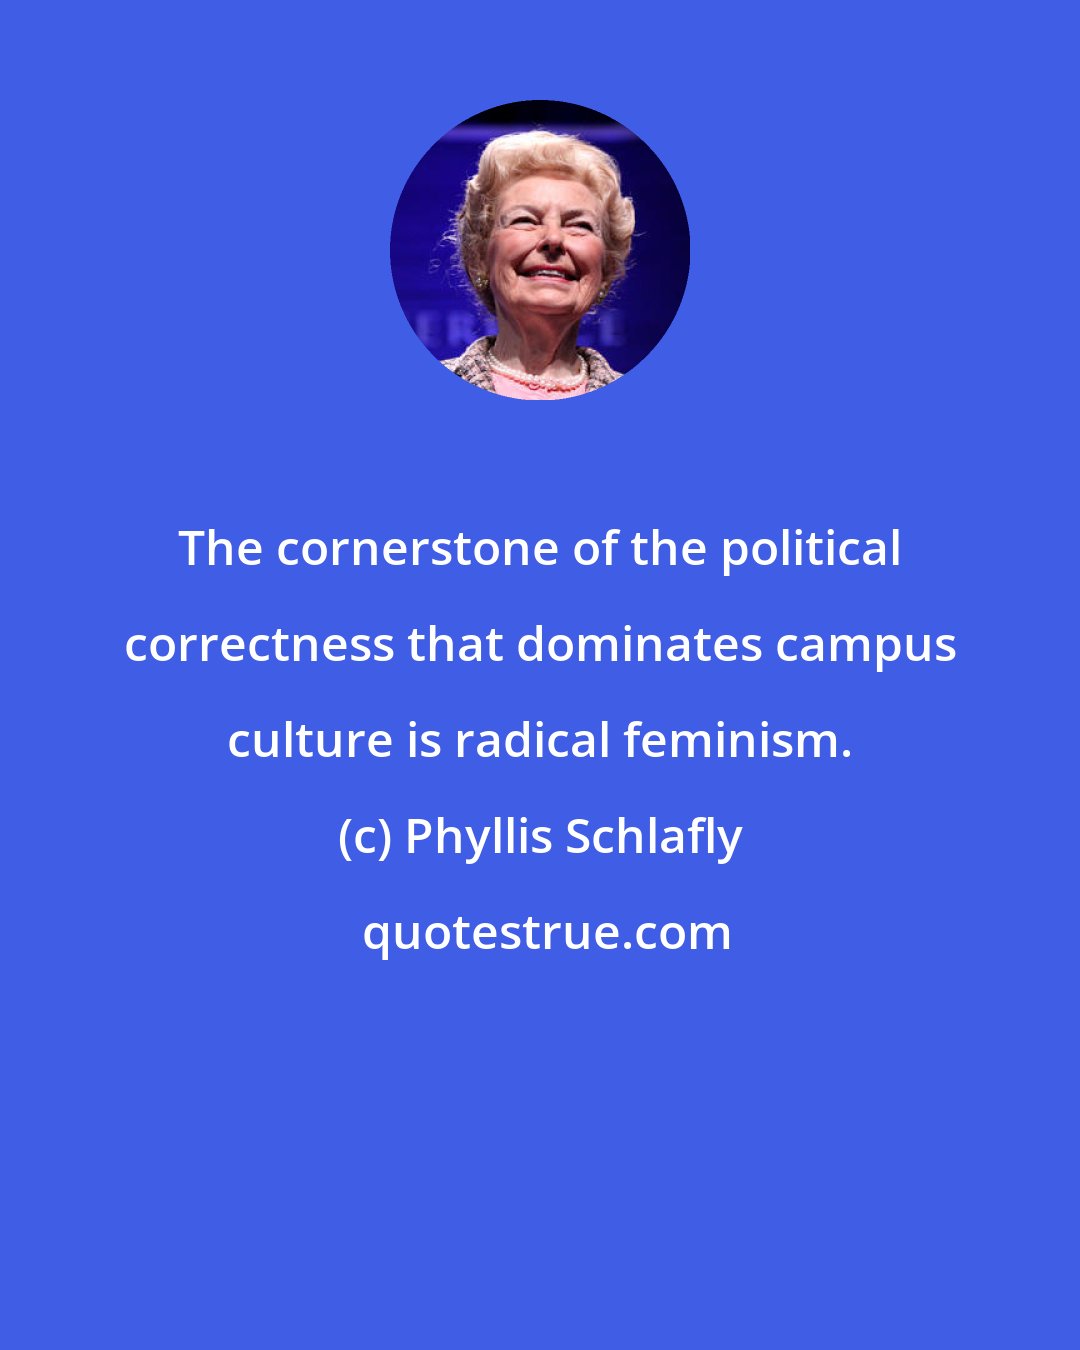 Phyllis Schlafly: The cornerstone of the political correctness that dominates campus culture is radical feminism.